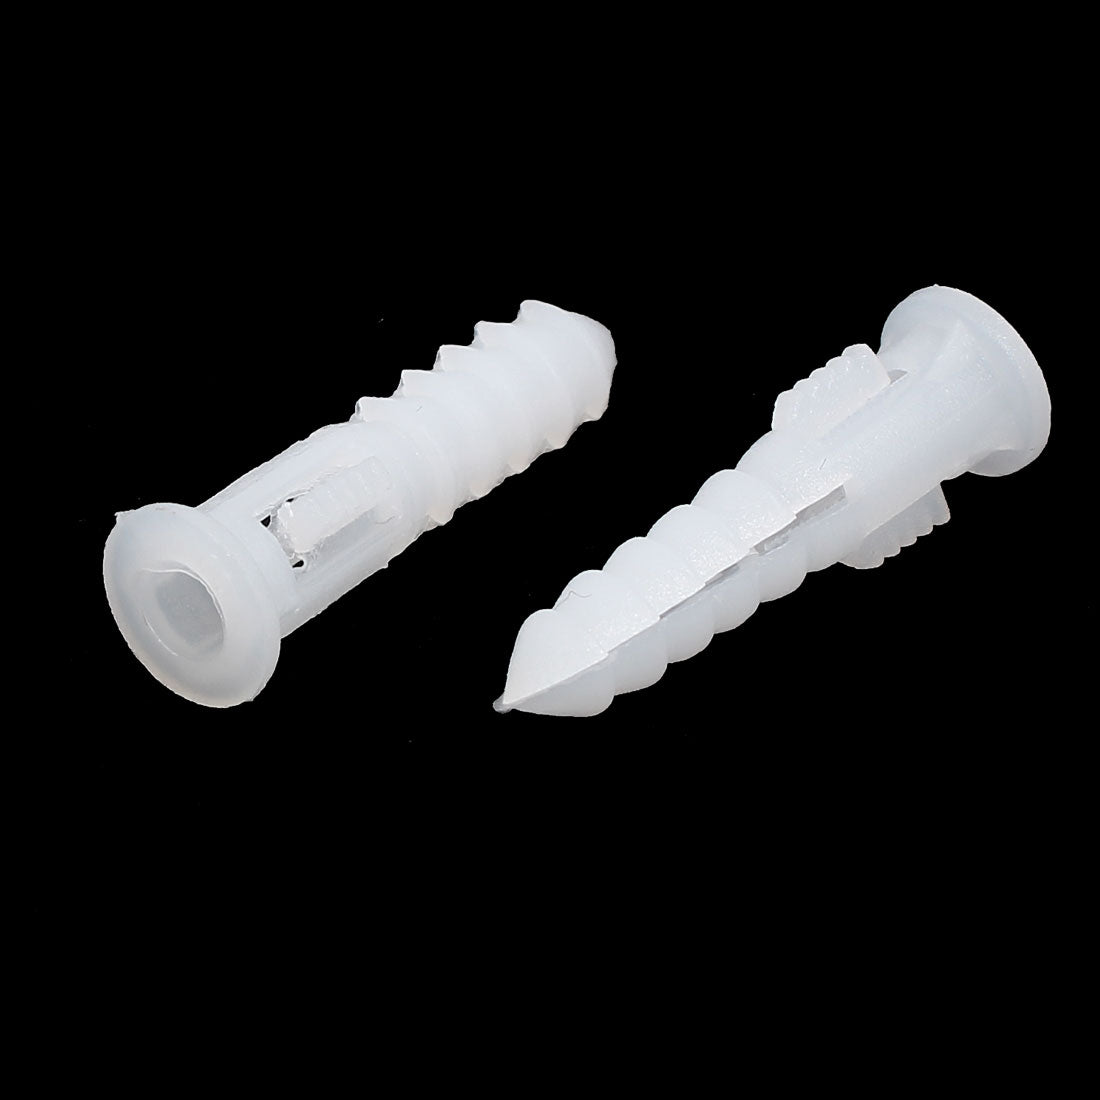 uxcell Uxcell 30mm Length Plastic Expansion Bolt Wall Drywall Anchor White 60pcs